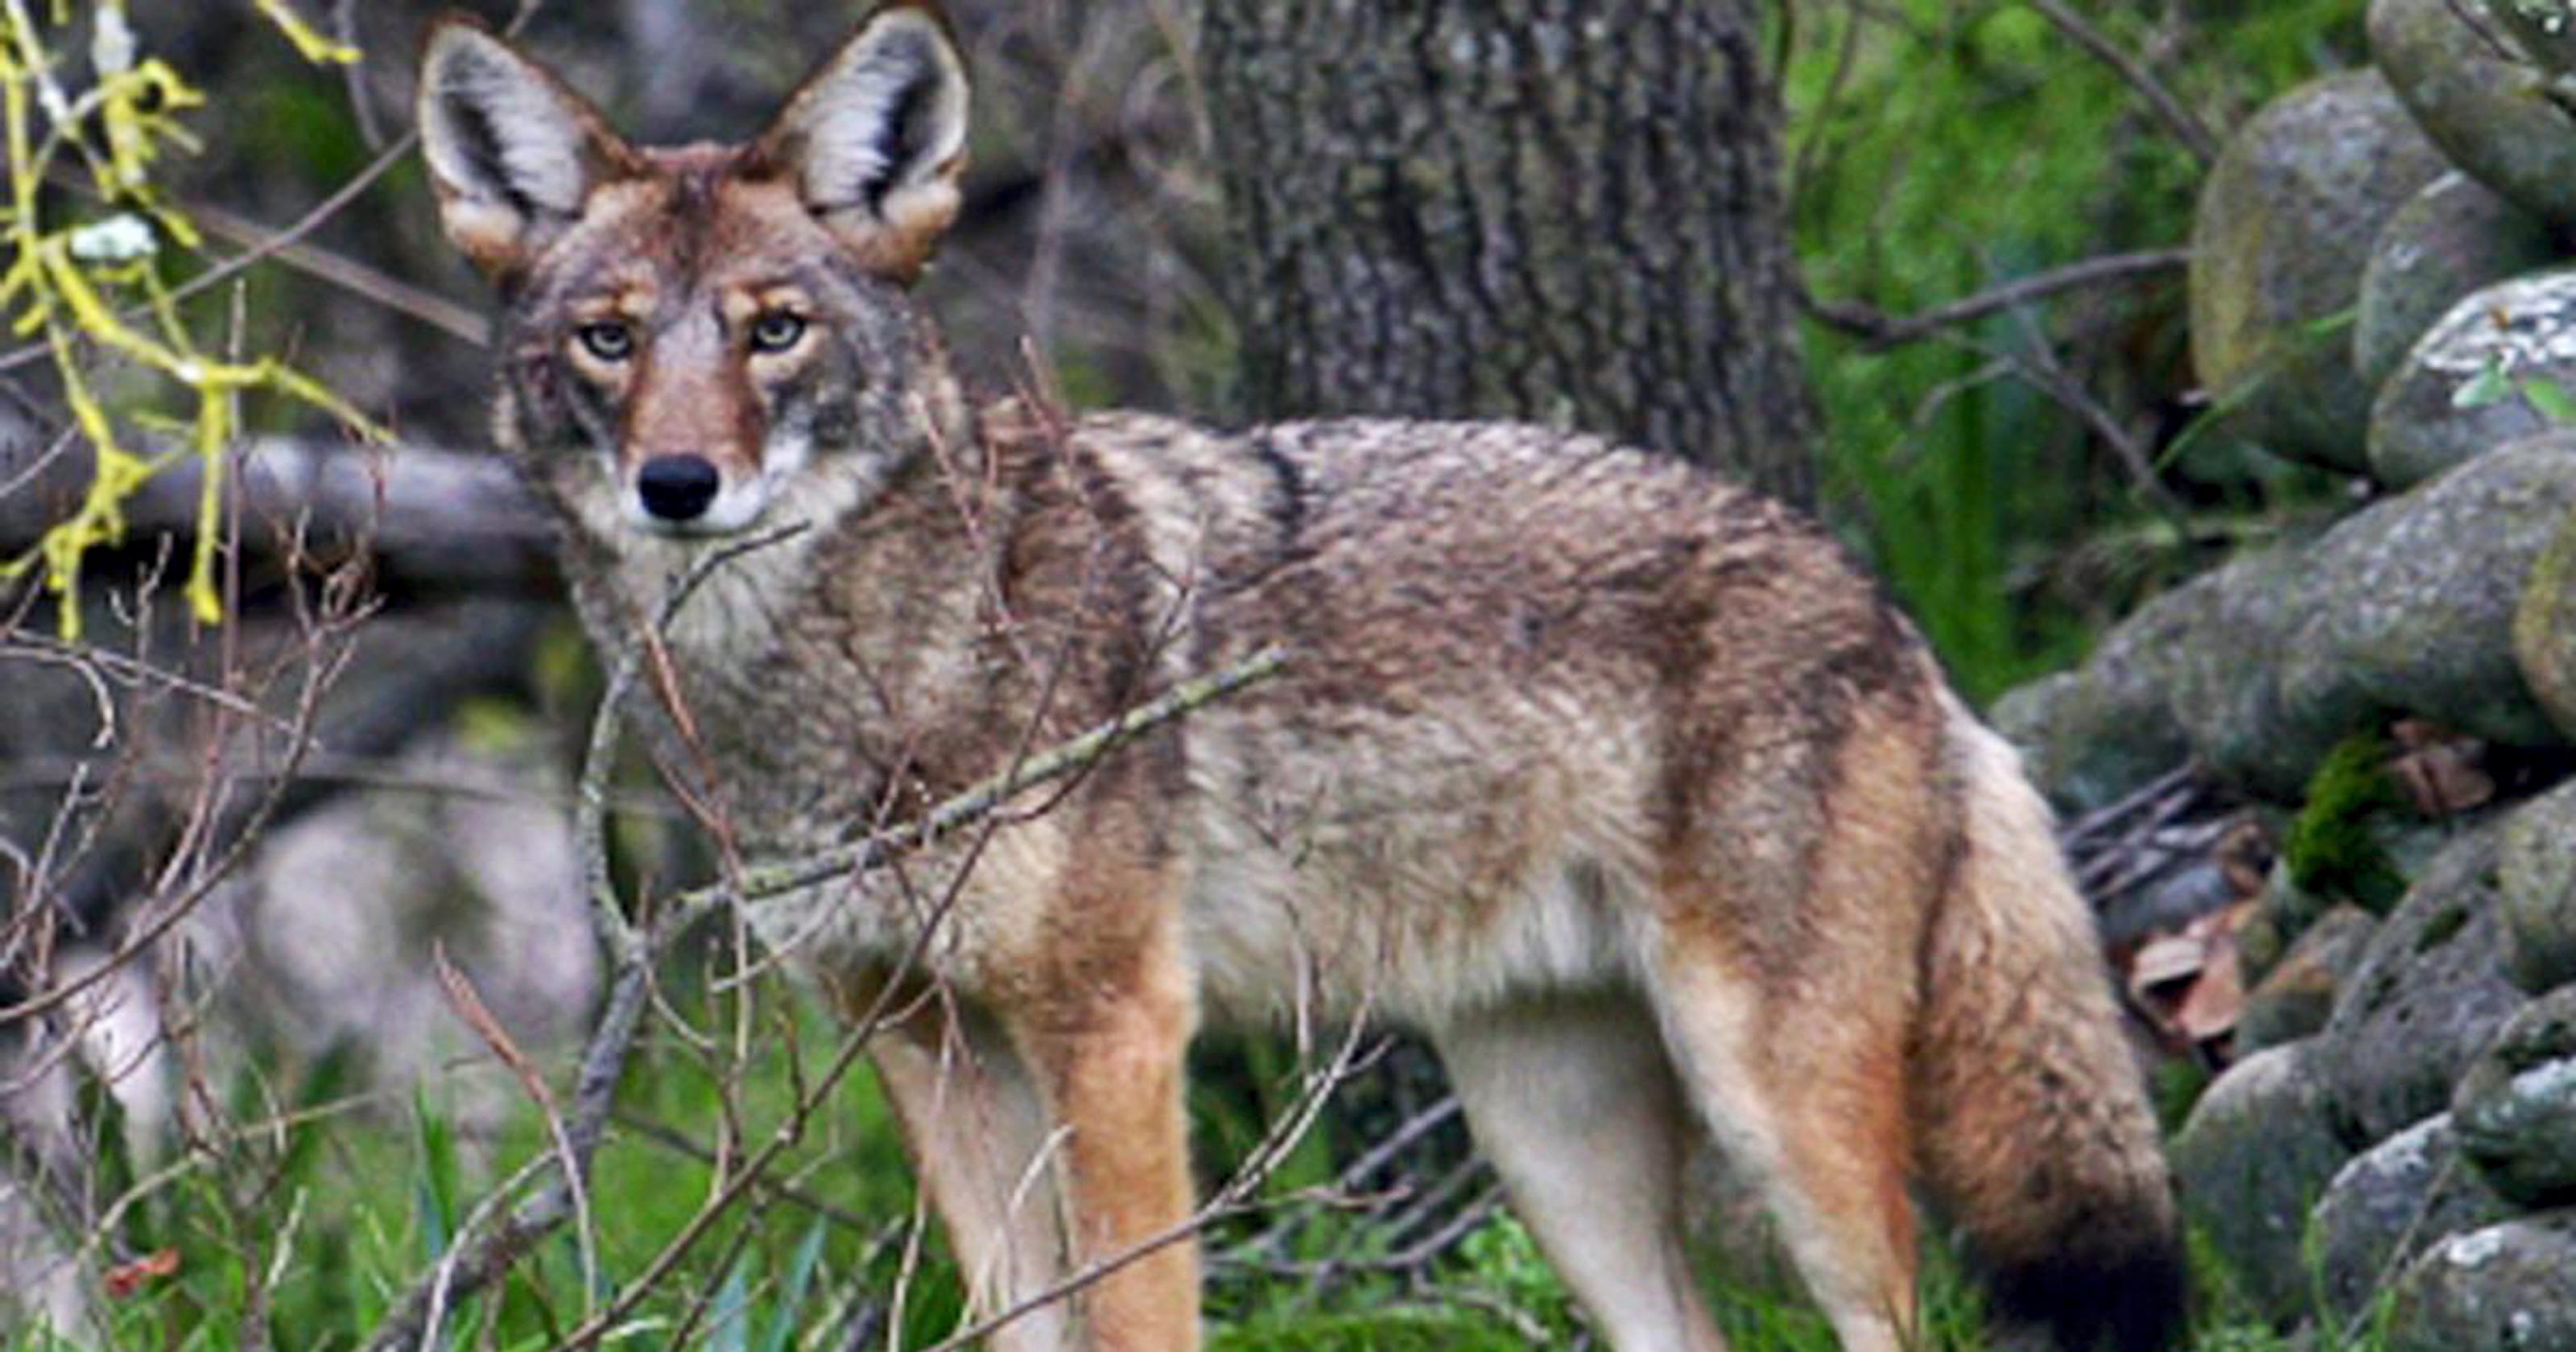 Coyotes in York County raise concern on Facebook